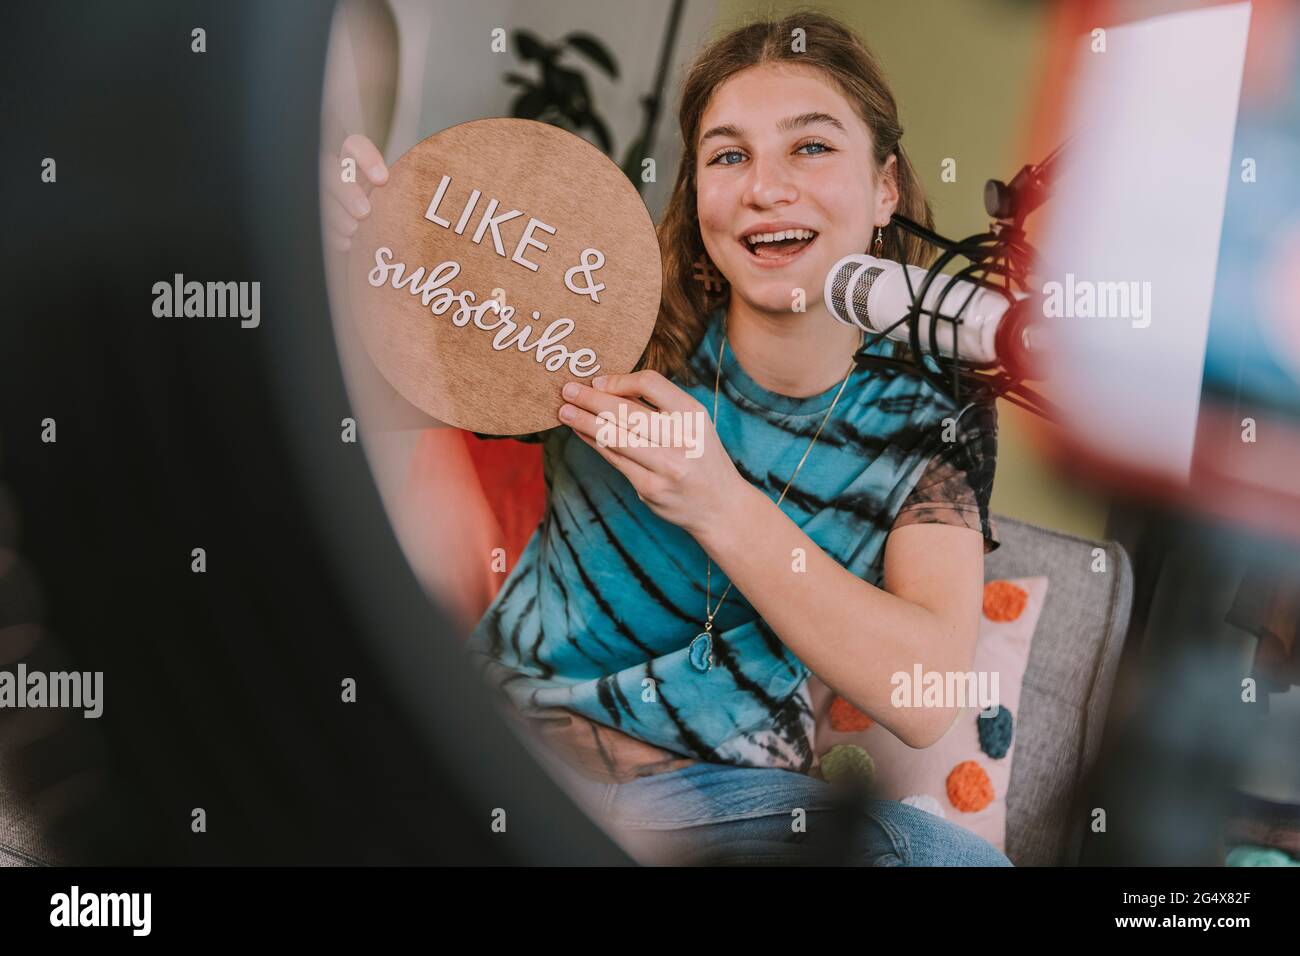 Girl showing like and subscribe sign while vlogging at home Stock Photo